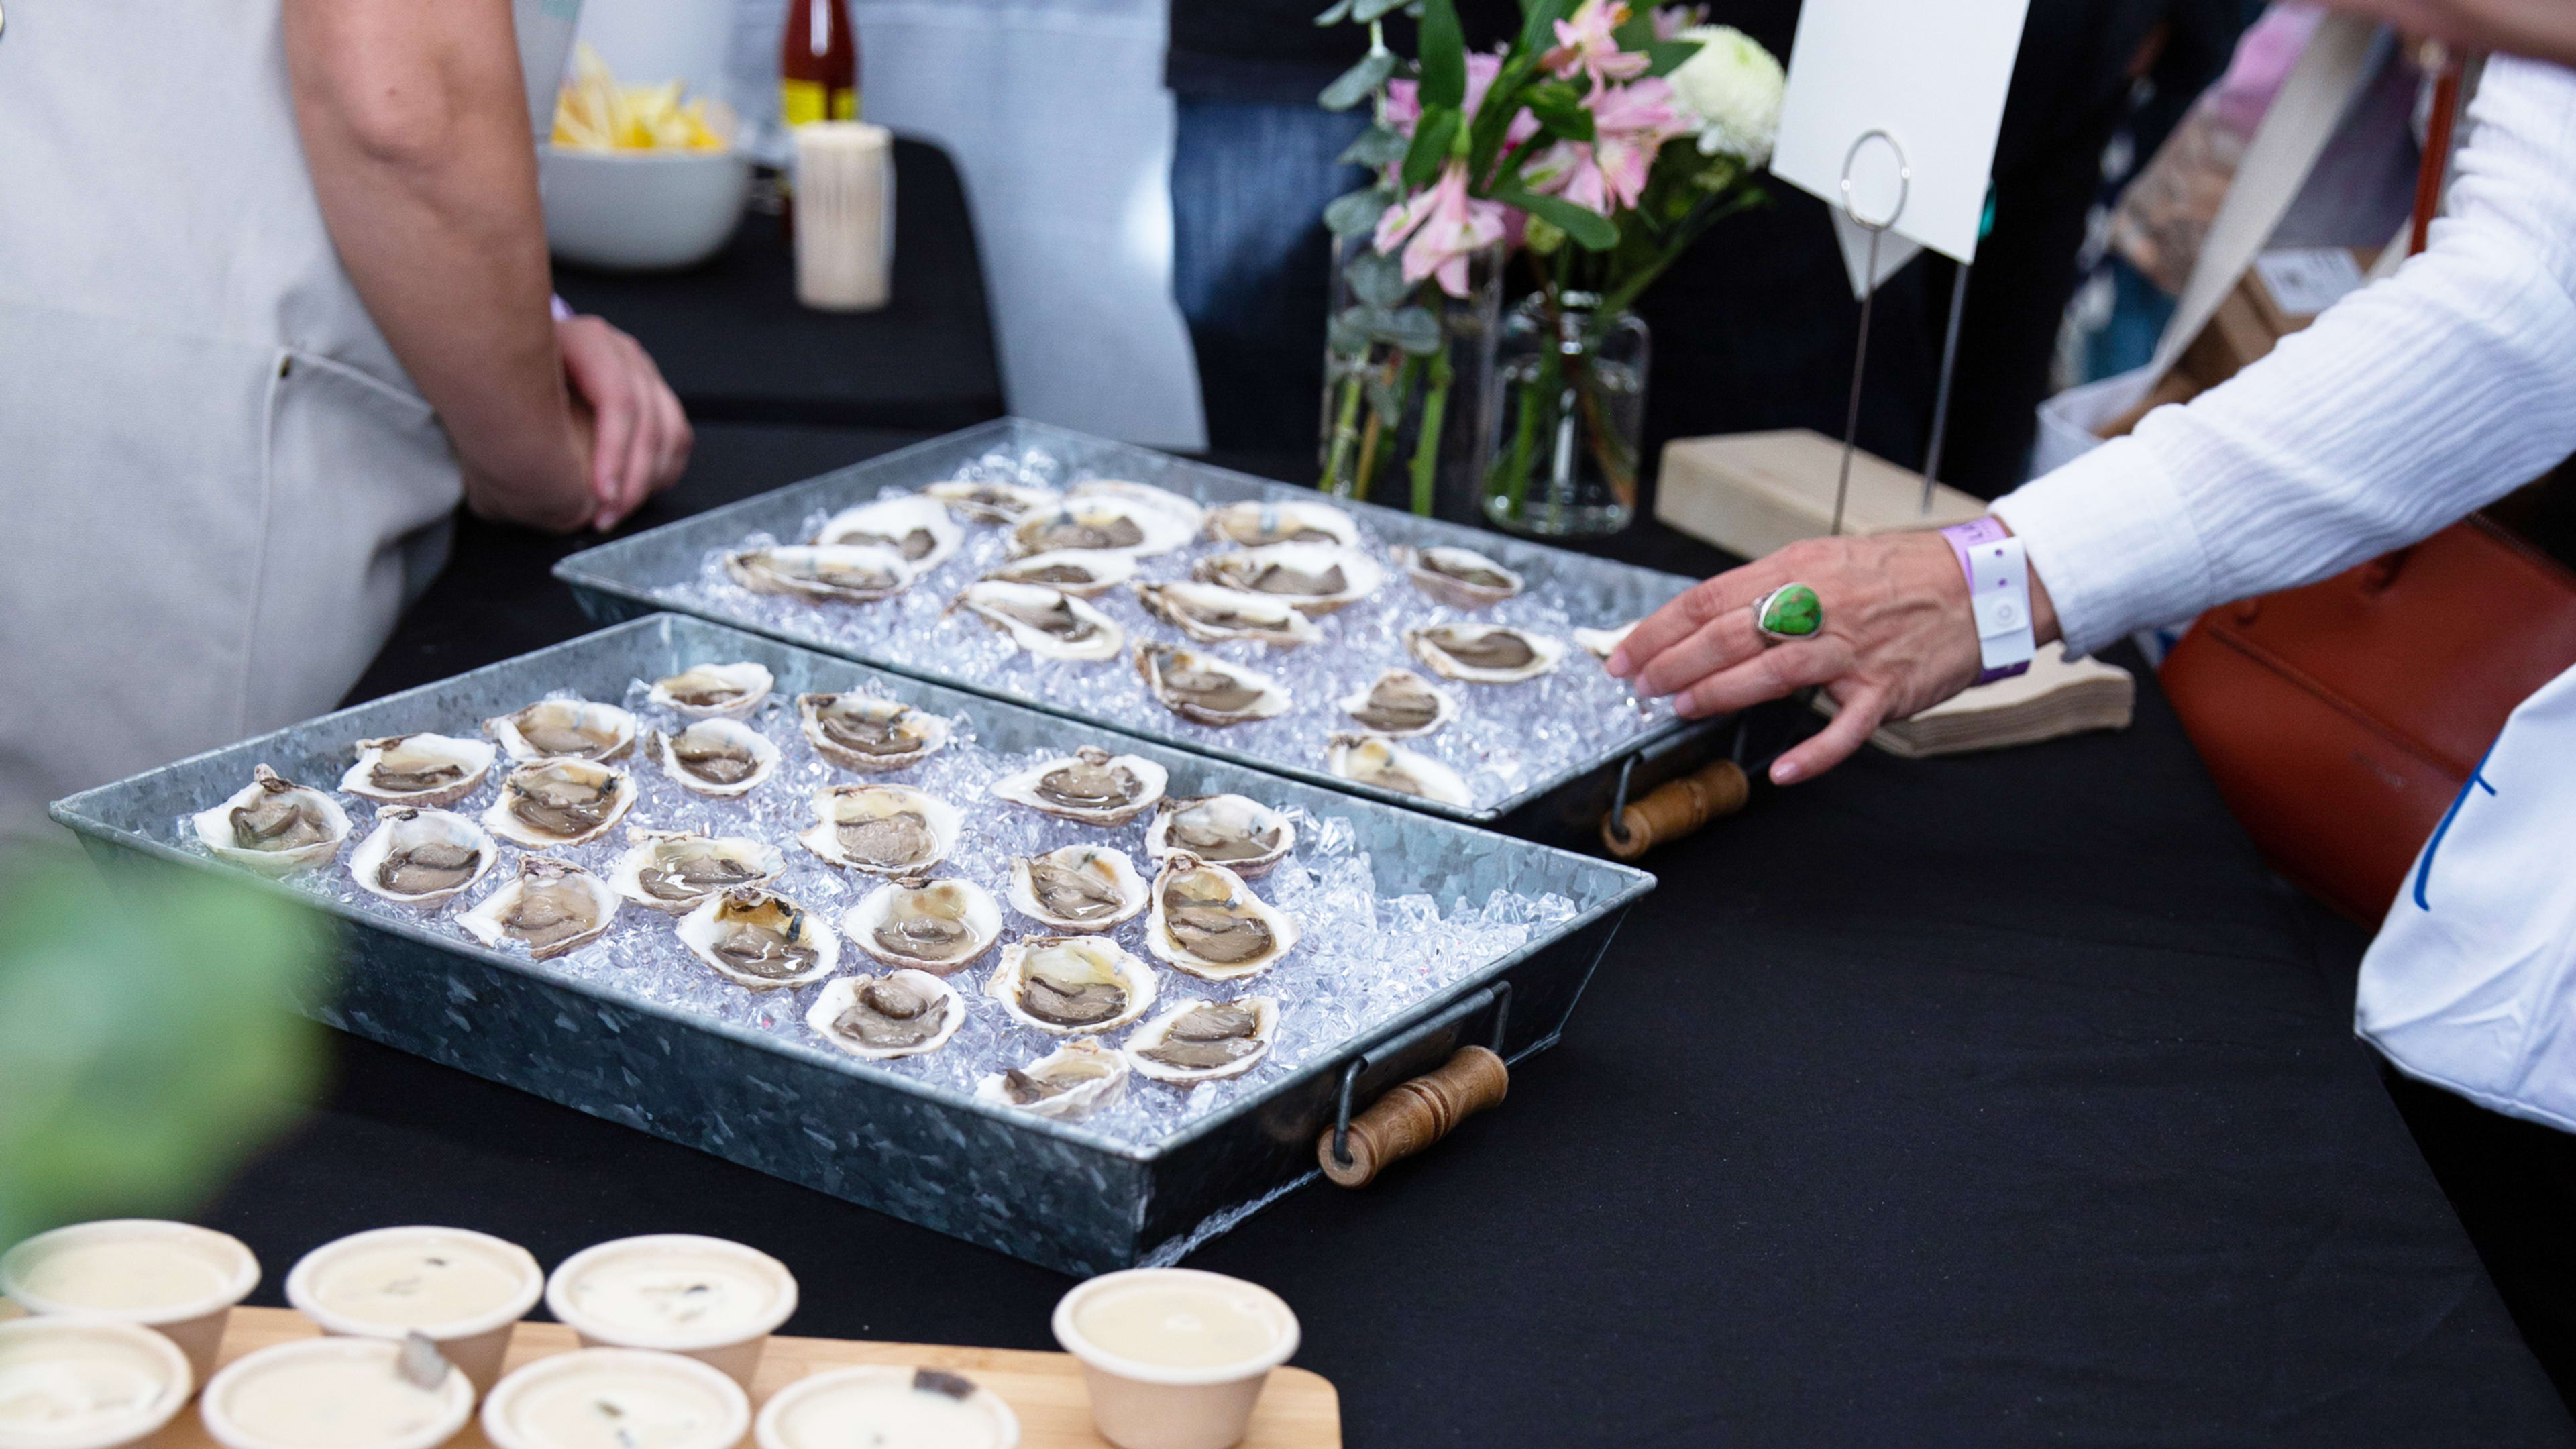 From oyster-free oysters to plant-based blue cheese: 5 things I ate at an event for cutting-edge vegan food